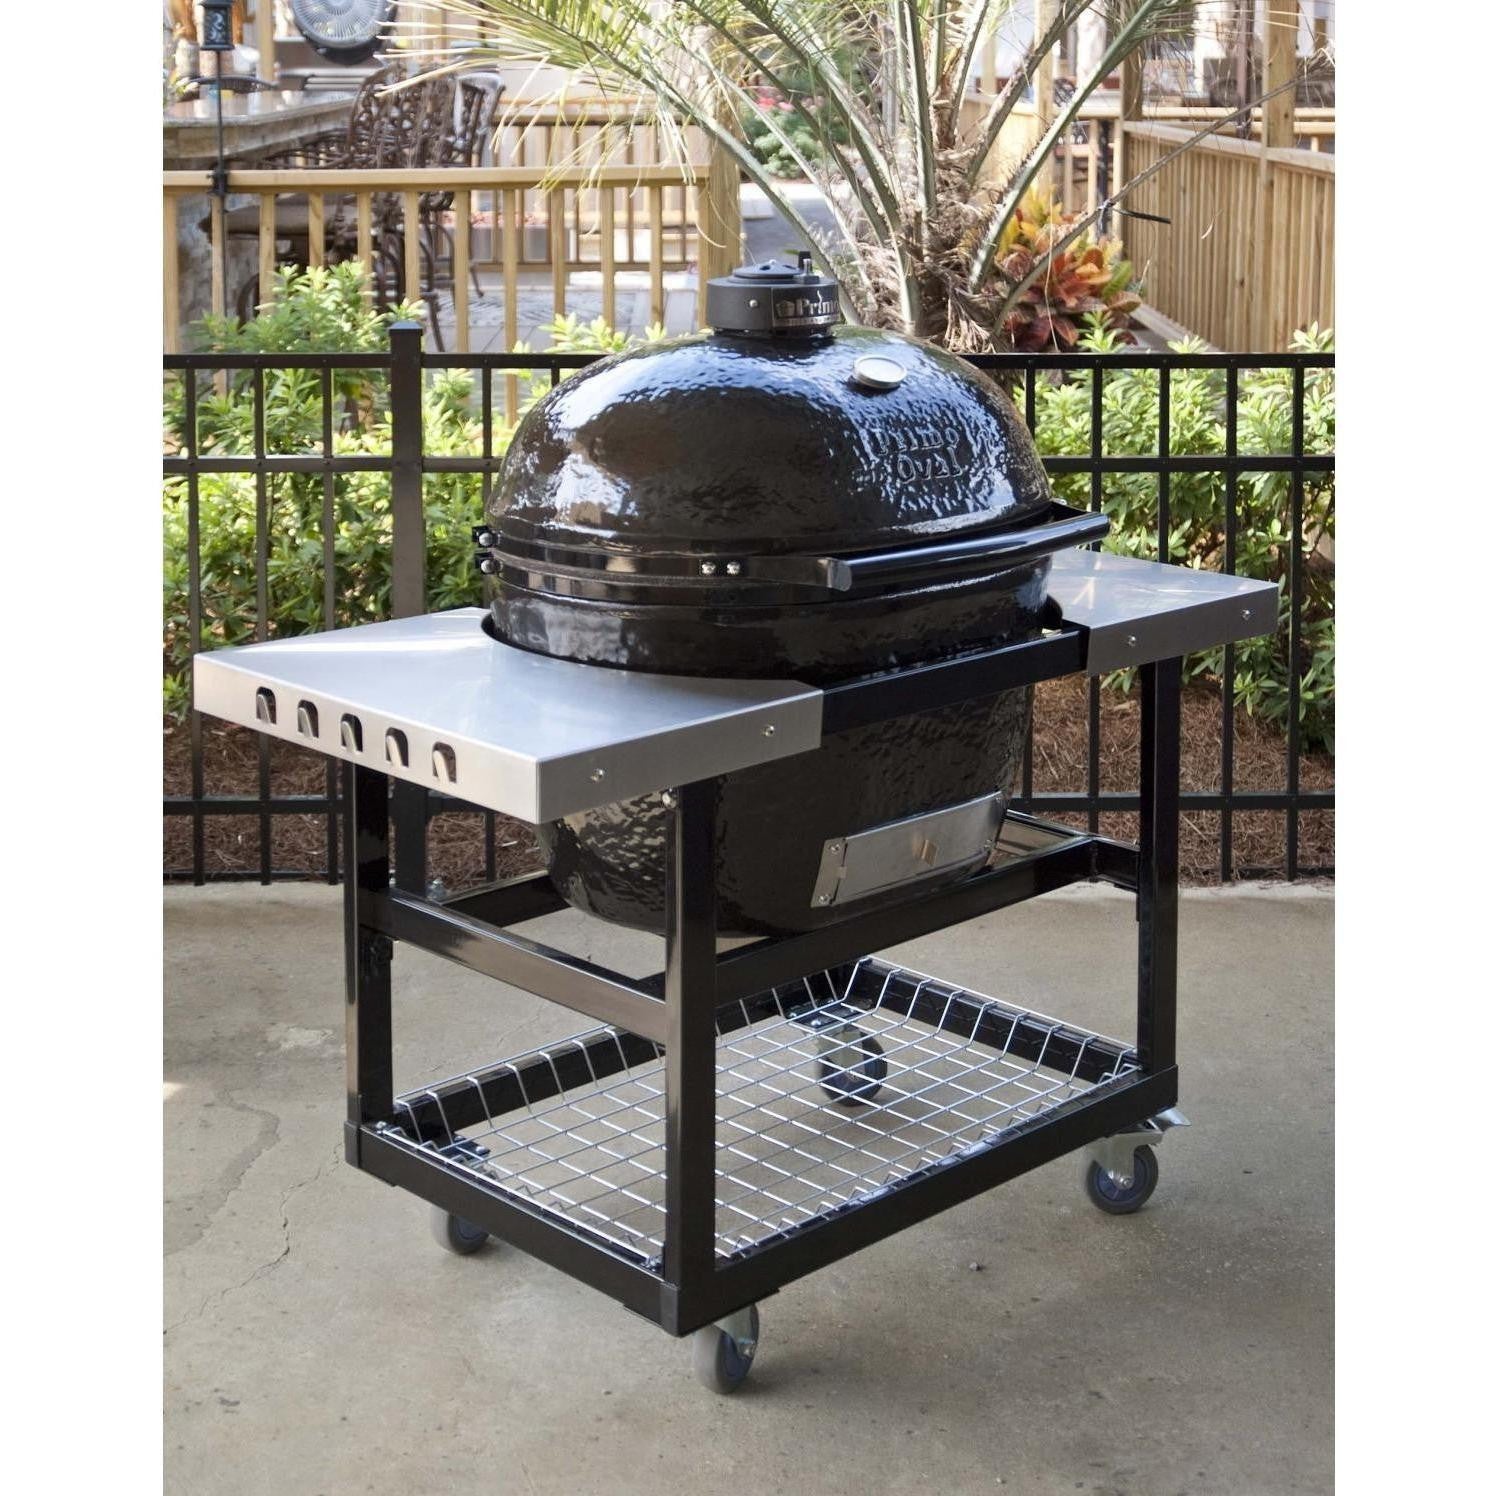 Primo Ceramic Charcoal All In One Kamado Grill Oval LG 300